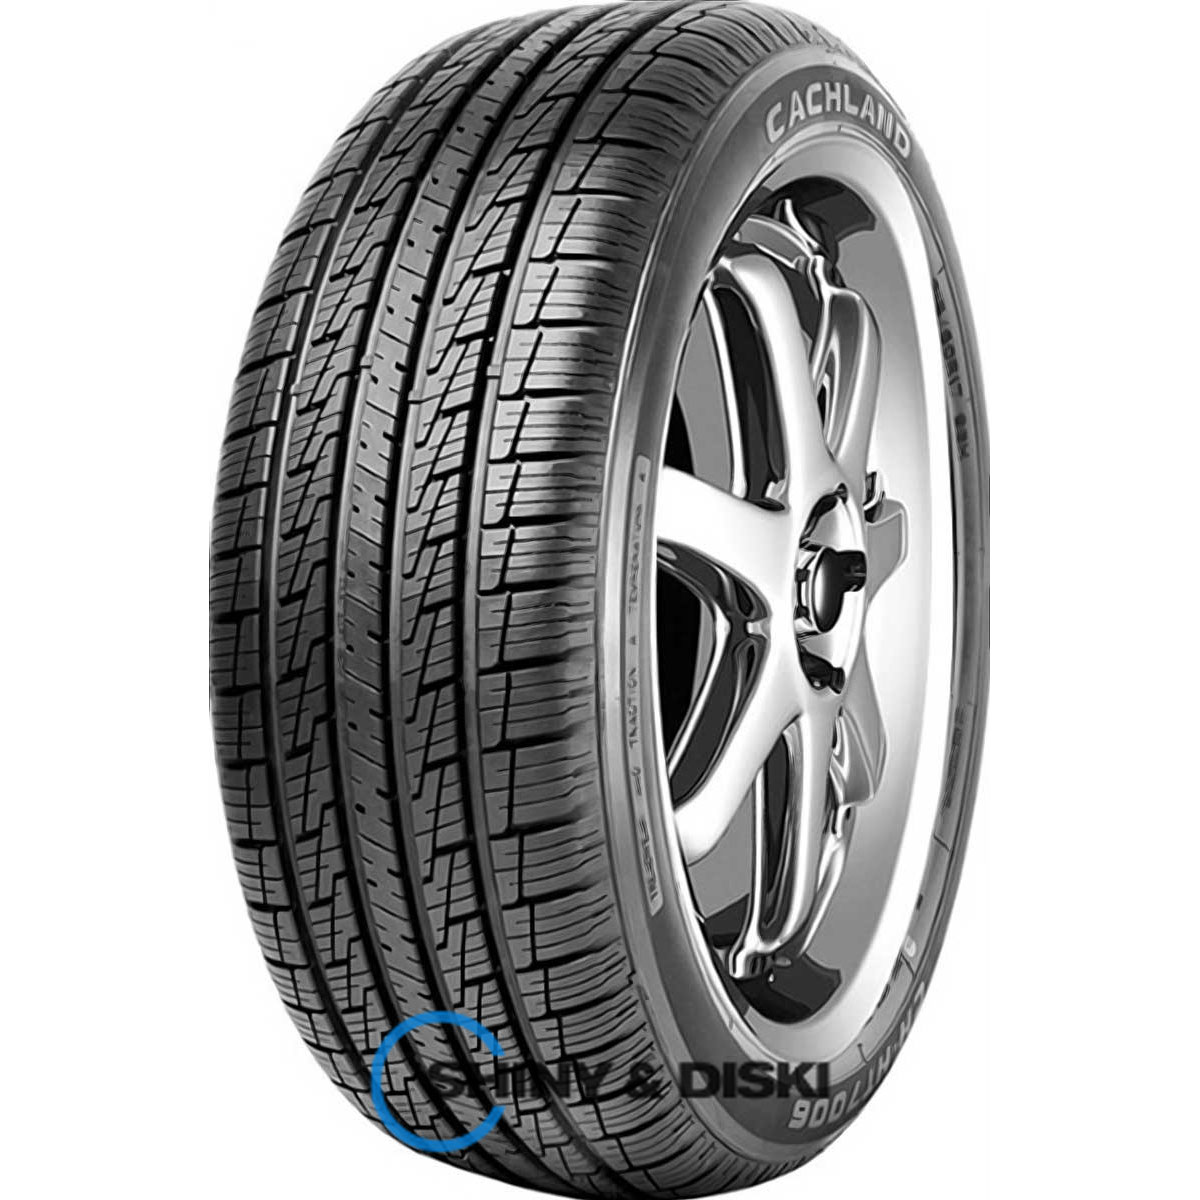 cachland ch-ht7006 225/75 r16 115/112s